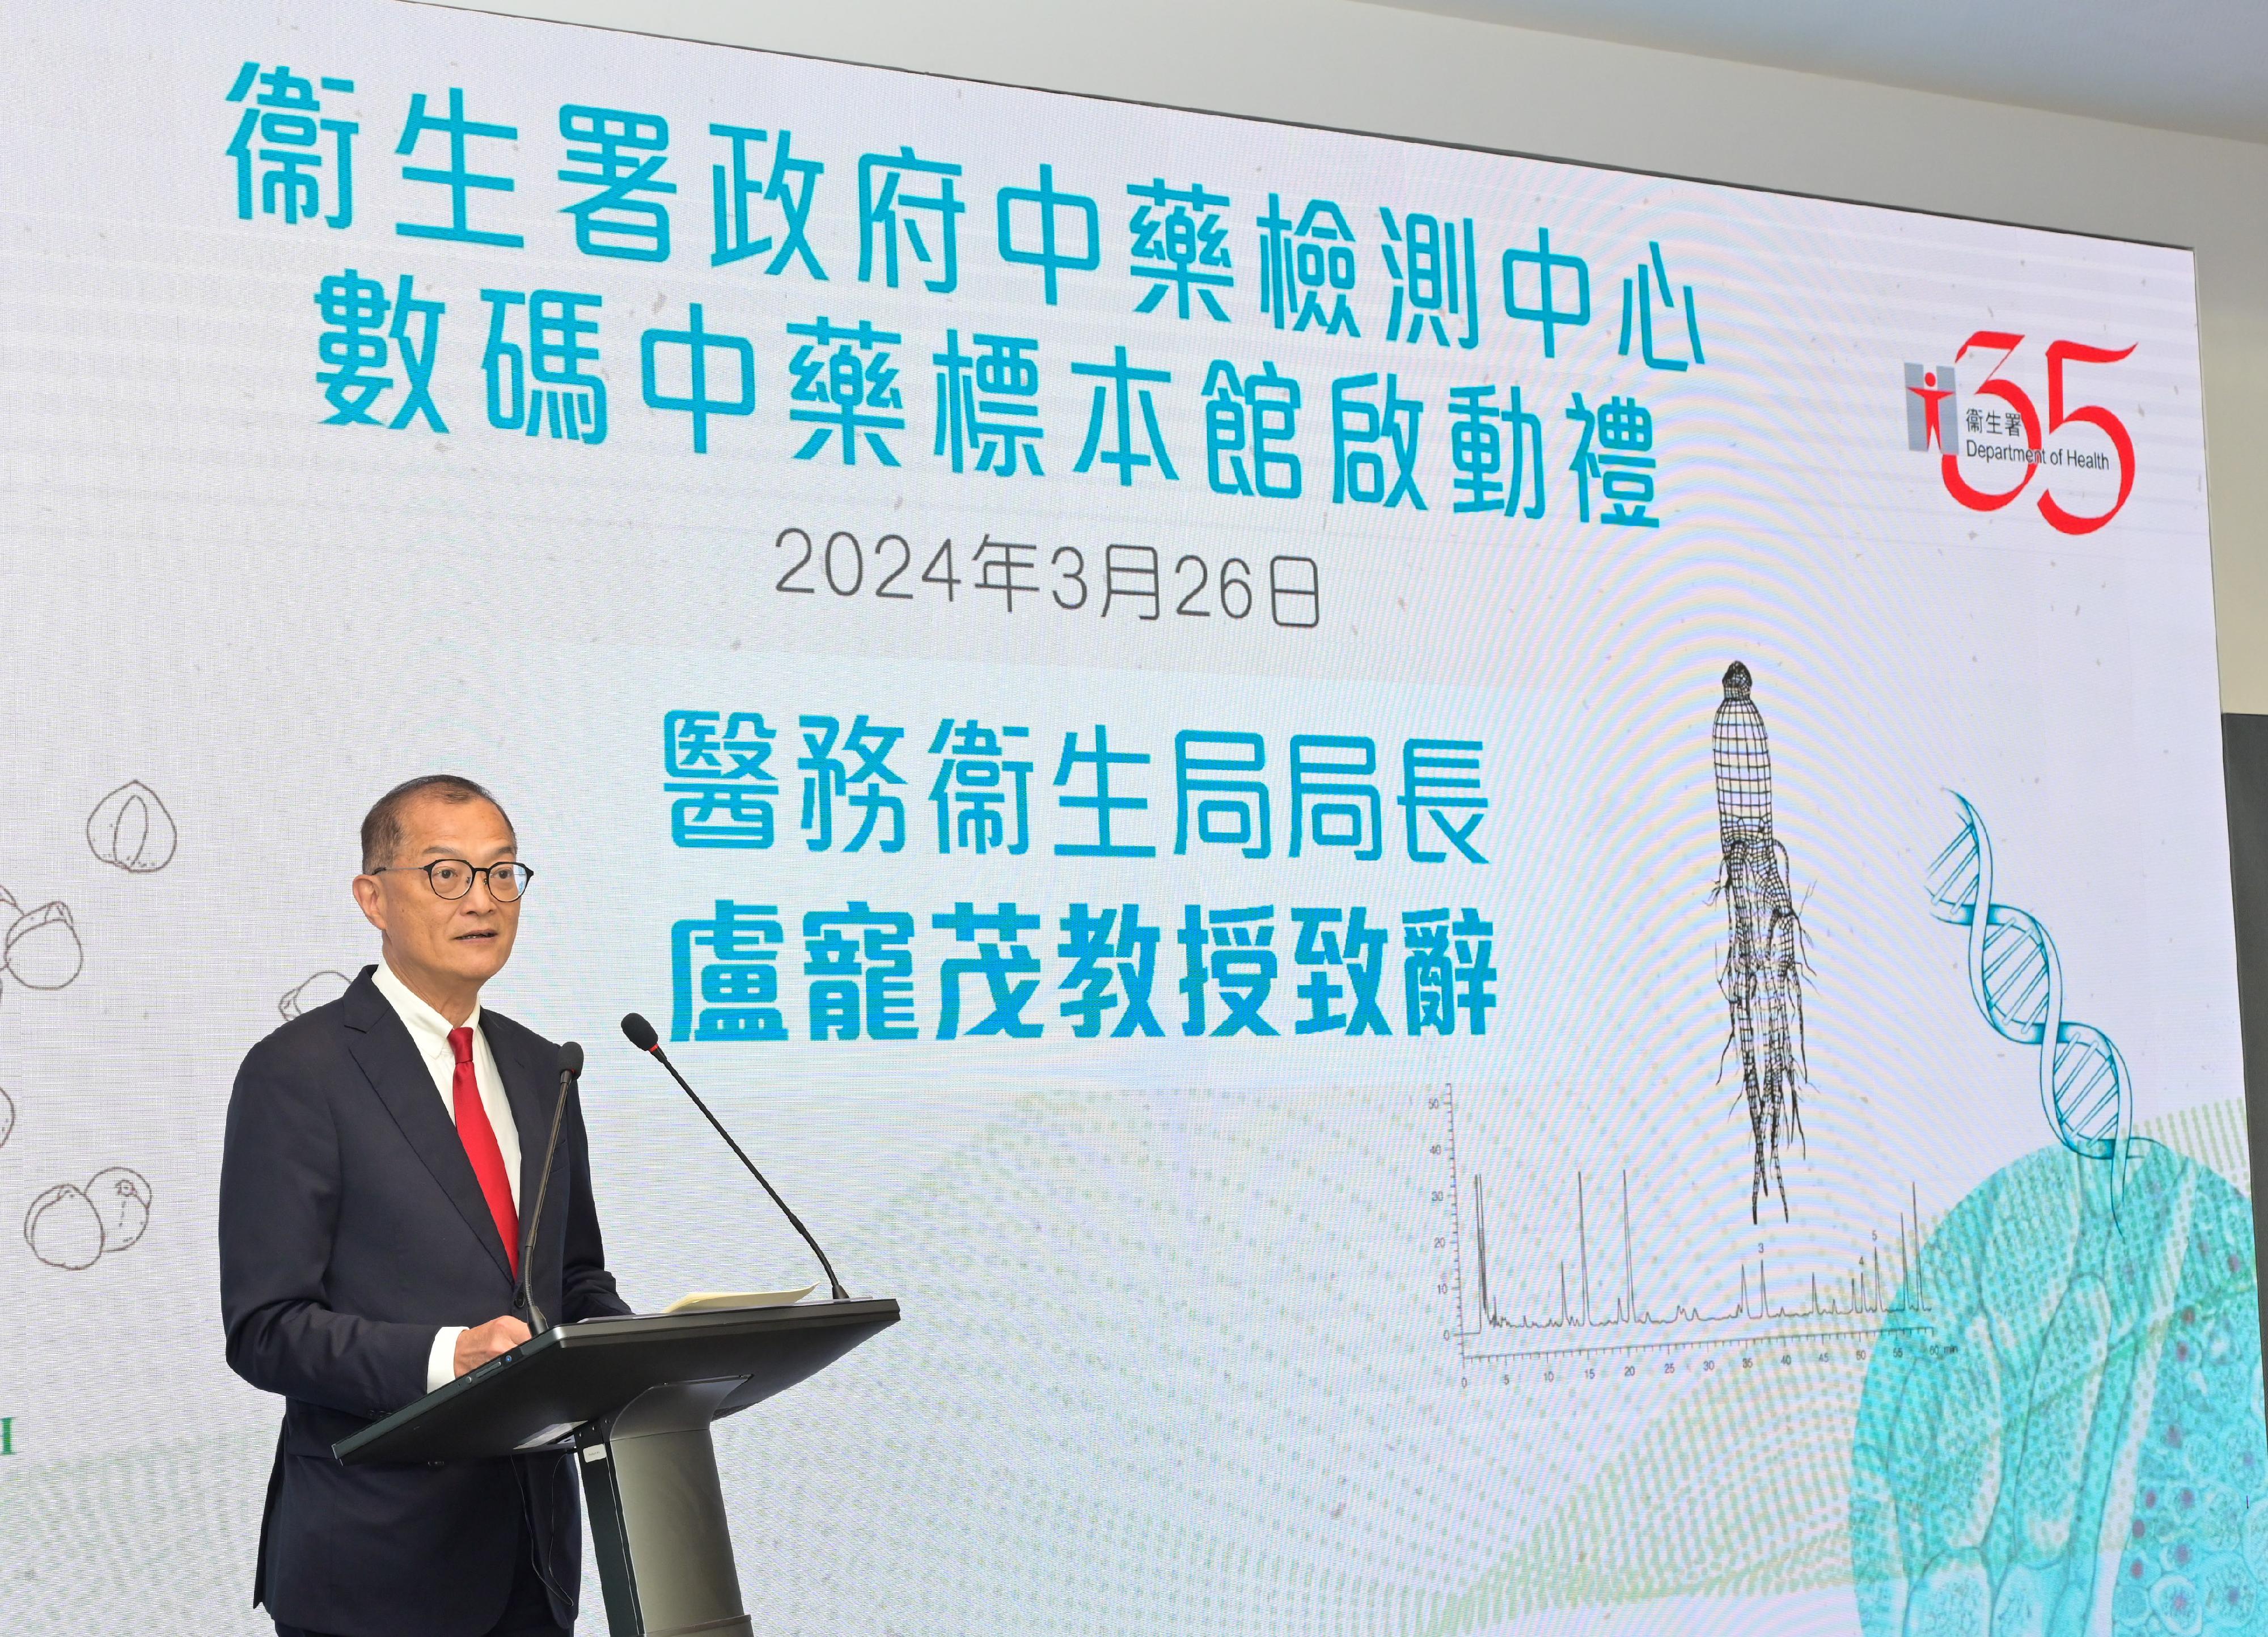 The Secretary for Health, Professor Lo Chung-mau, today (March 26) attended the launch ceremony of the Department of Health's new dedicated website Digital Herbarium for Chinese Medicines. Photo shows Professor Lo delivering a speech at the launching ceremony.